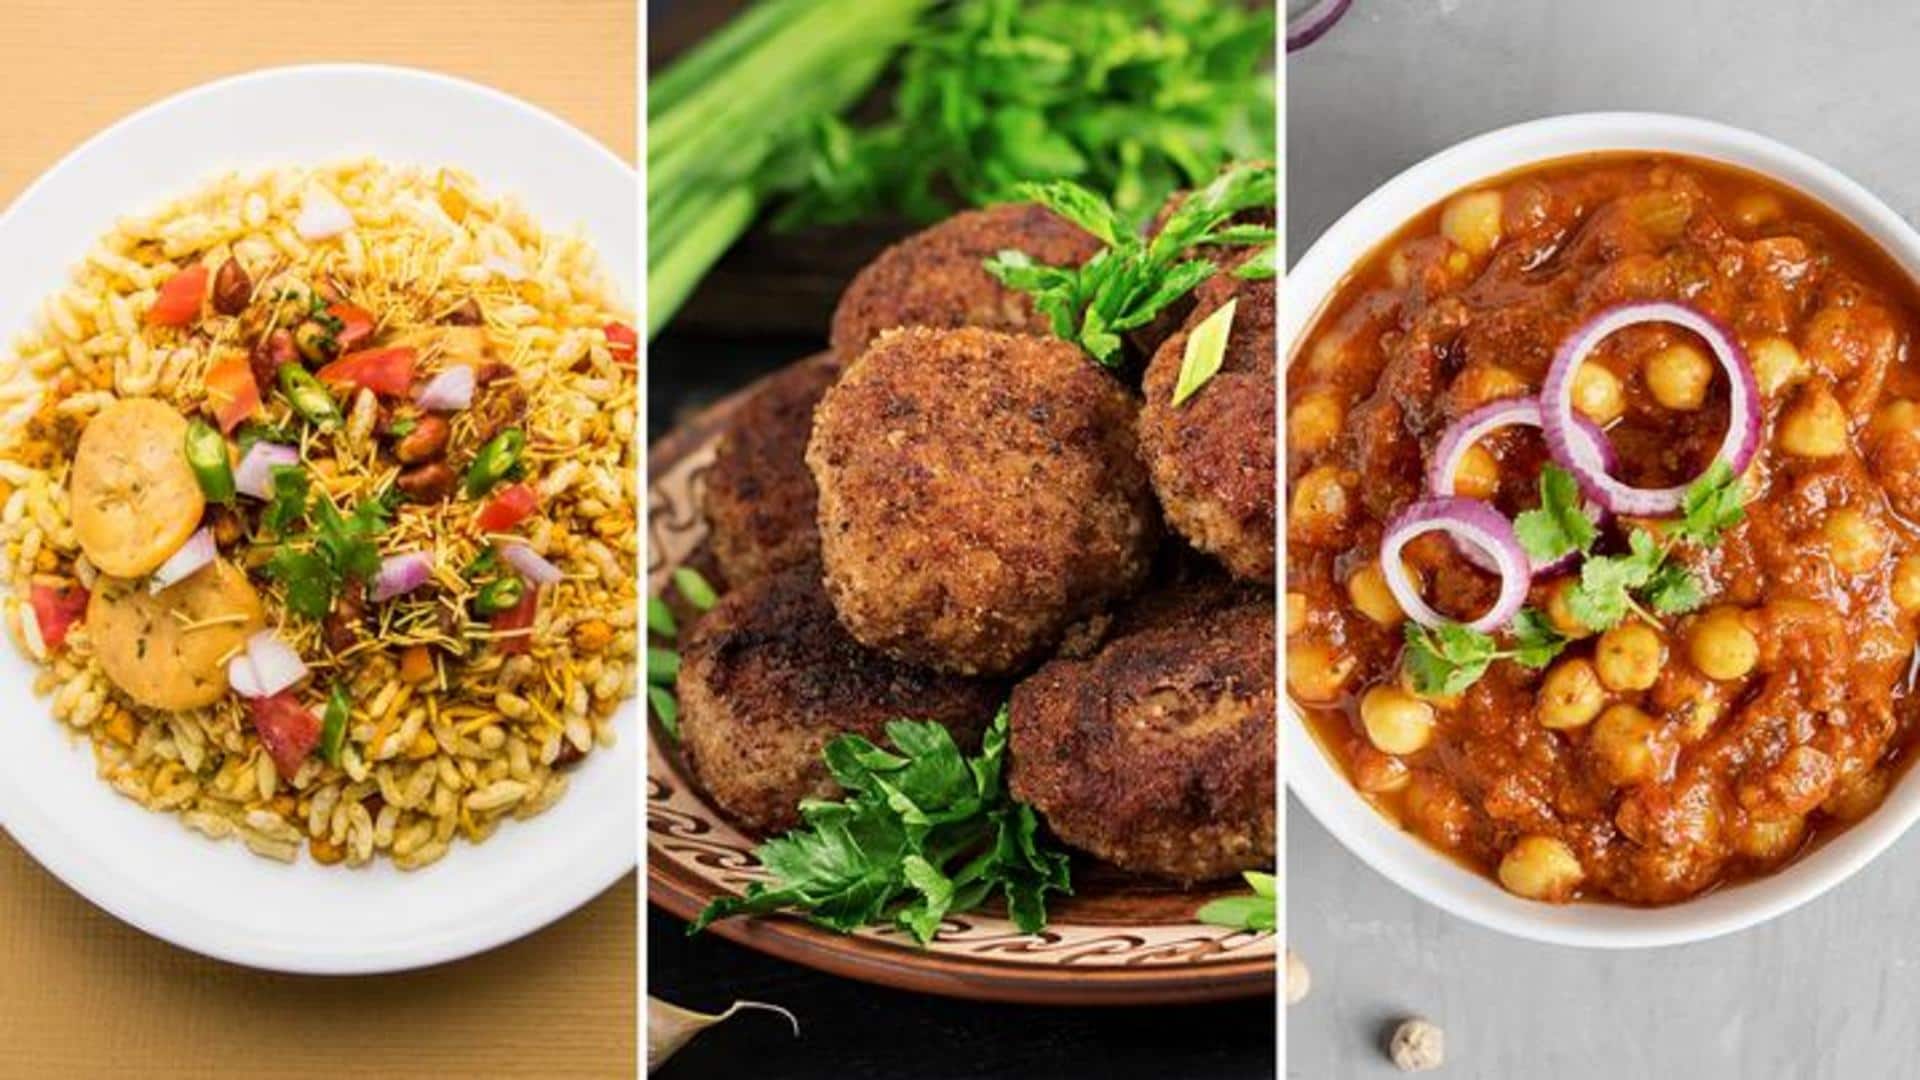 5 snack recipes from Bengal to satiate your evening cravings 